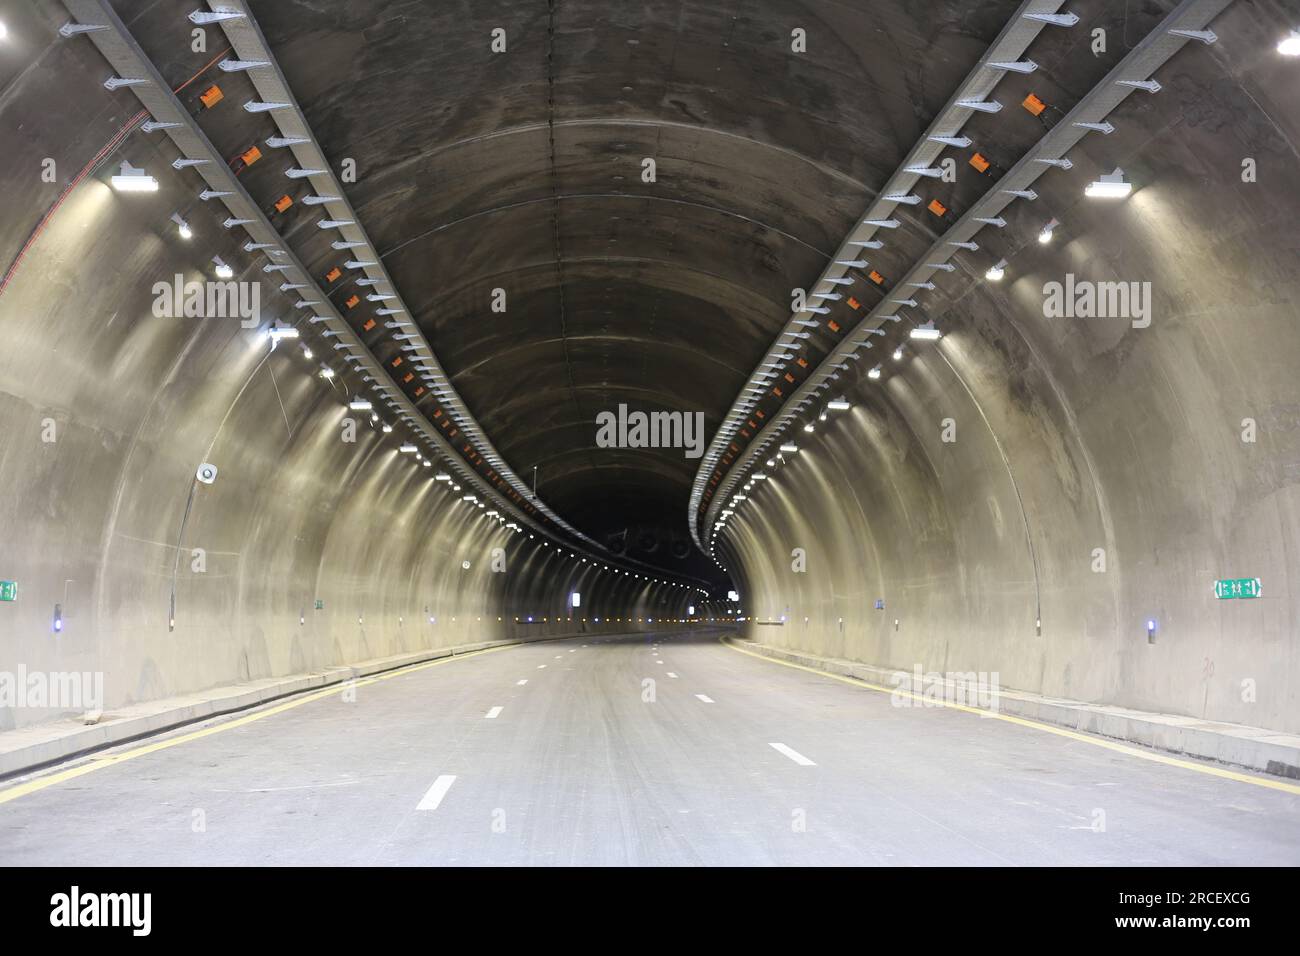 (230714) -- SIDI AICH, July 14, 2023 (Xinhua) -- This photo taken on July 11, 2023 shows an interior view of the Sidi Aich Tunnel, part of the Bejaia Highway that starts from the Bejaia port and connects to the East-West Highway, in Sidi Aich, Algeria. TO GO WITH 'China-built Algerian highway tunnel opens to traffic' (China Railway Construction Corporation Limited/Handout via Xinhua) Stock Photo